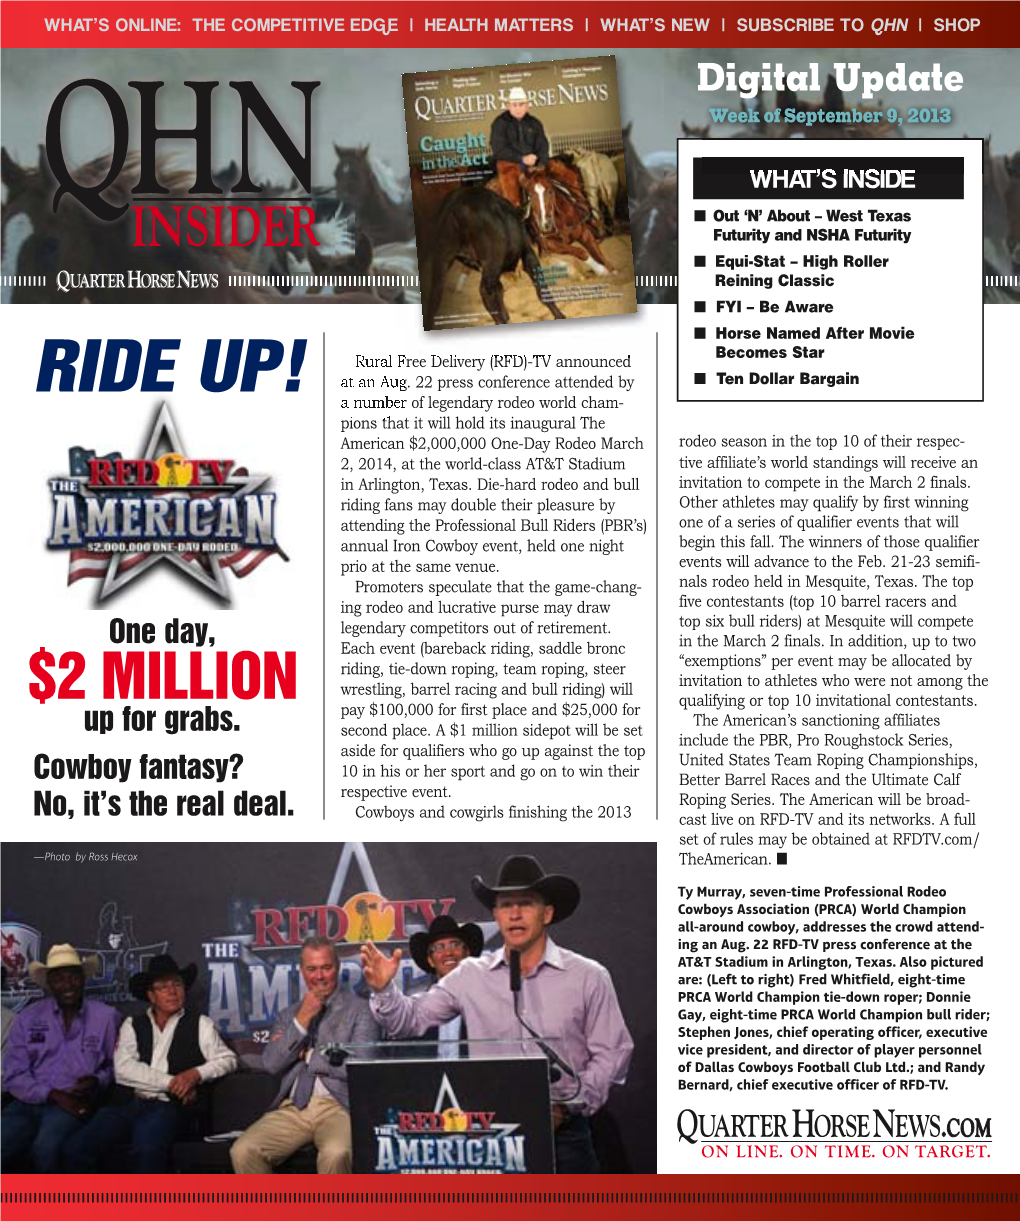 High Roller Reining Classic N FYI – Be Aware N Horse Named After Movie Becomes Star Rural Free Delivery (RFD)-TV Announced Ride Up! at an Aug